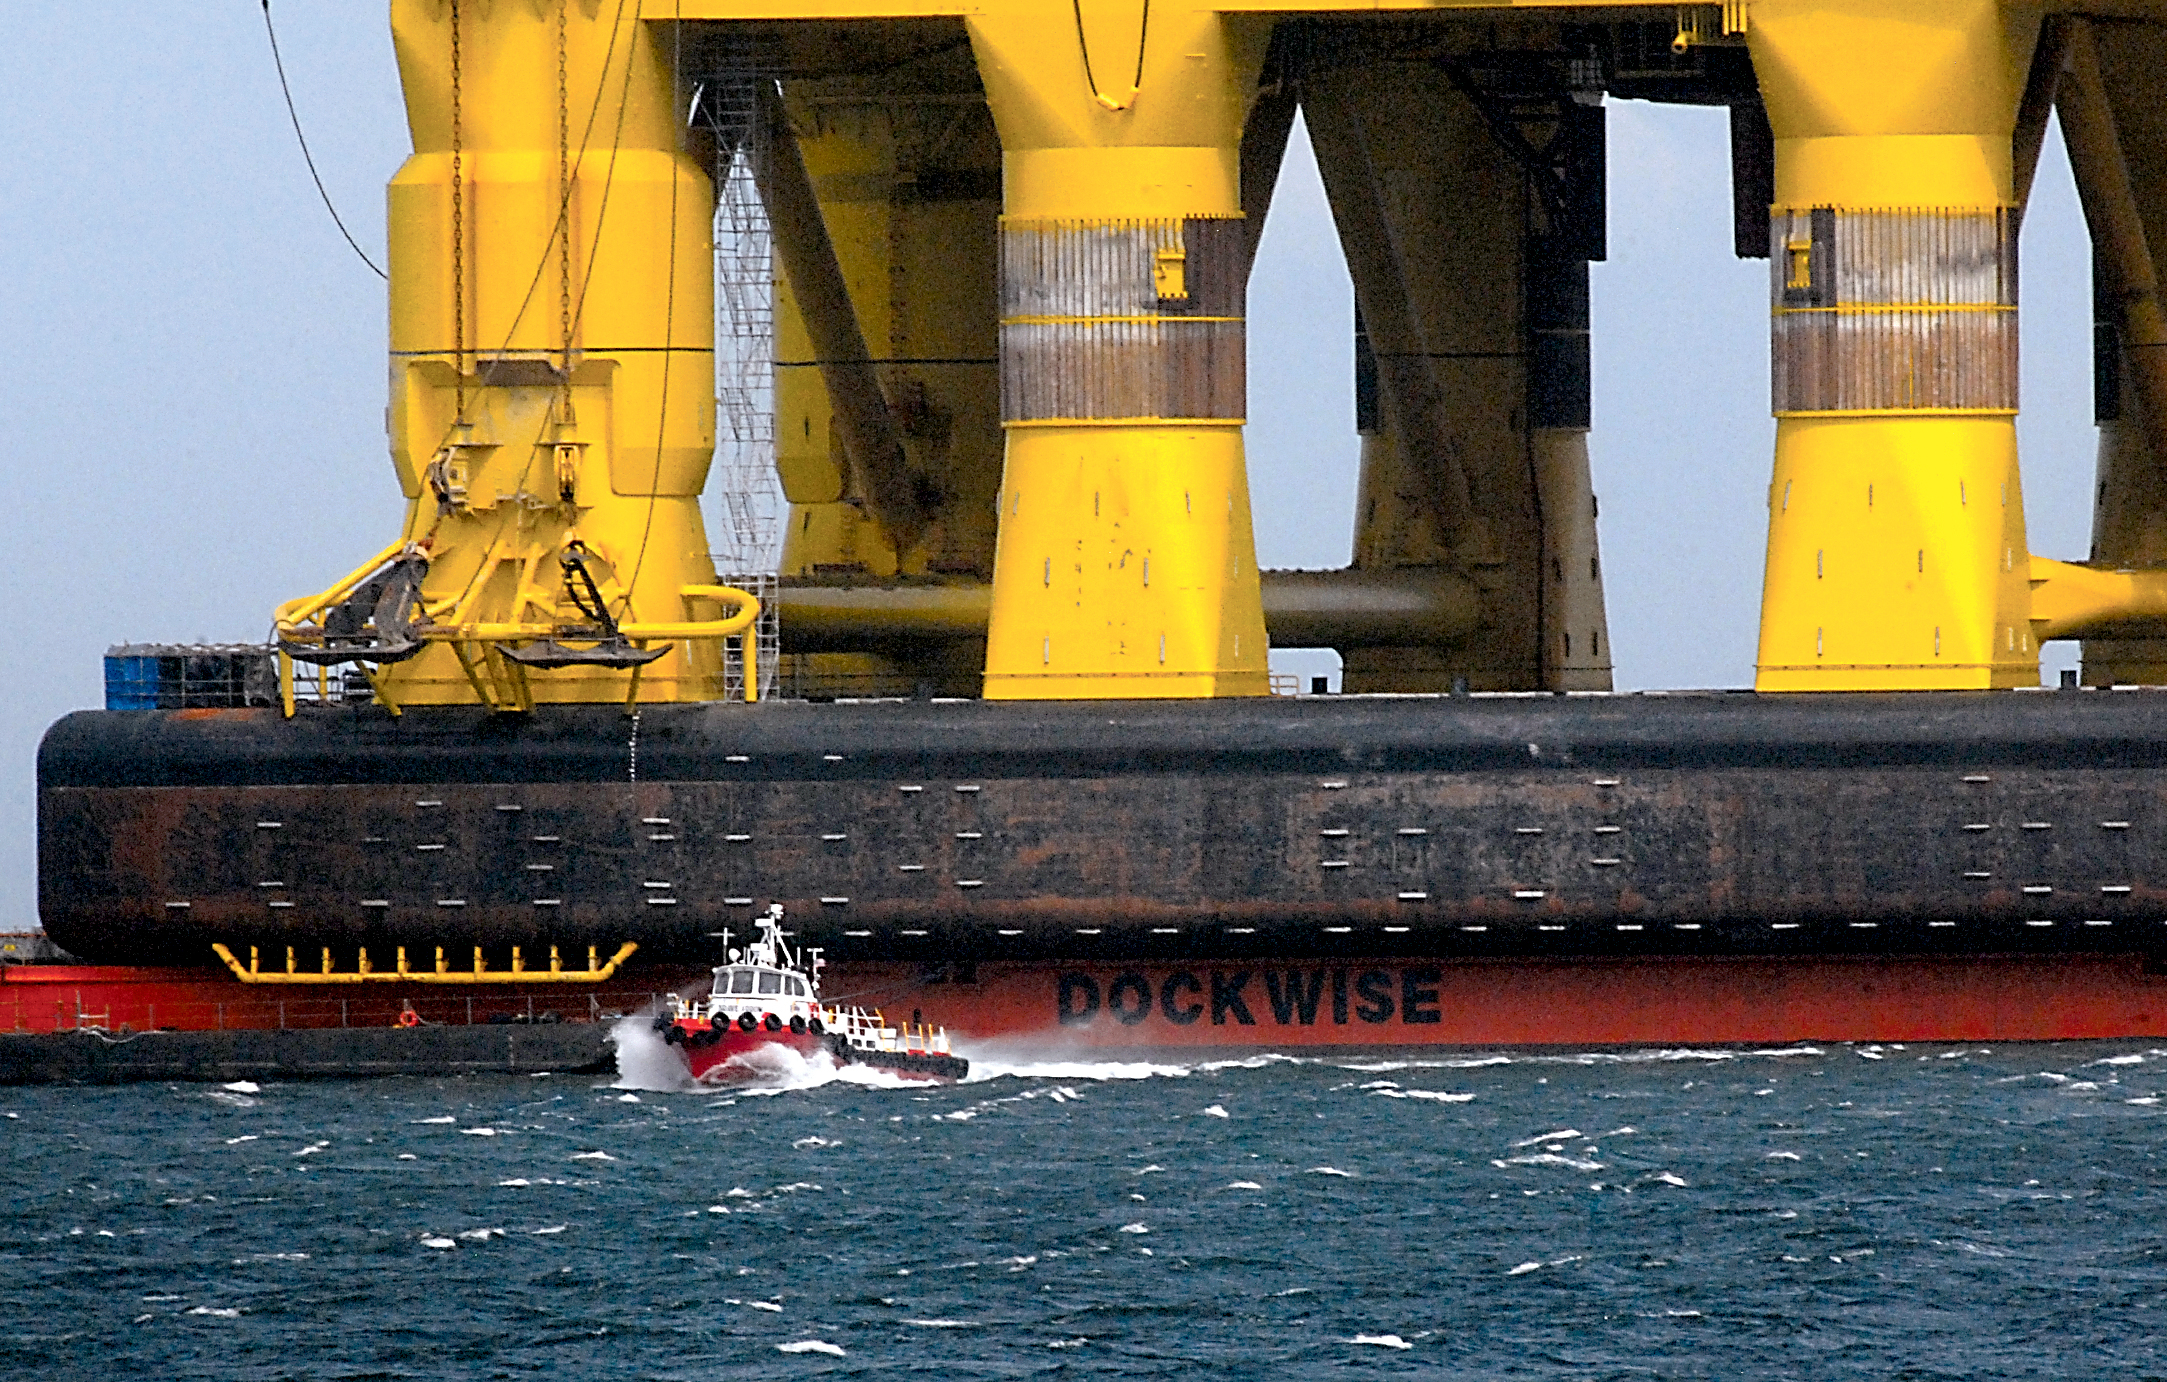 The Port Angeles-based launch Brave Arrow departs the Polar Pioneer offshore oil platform atop the MV Blue Marlin cargo deck ship as it shuttles workers to shore in Port Angeles Harbor on Tuesday. (Keith Thorpe/Peninsula Daily News)